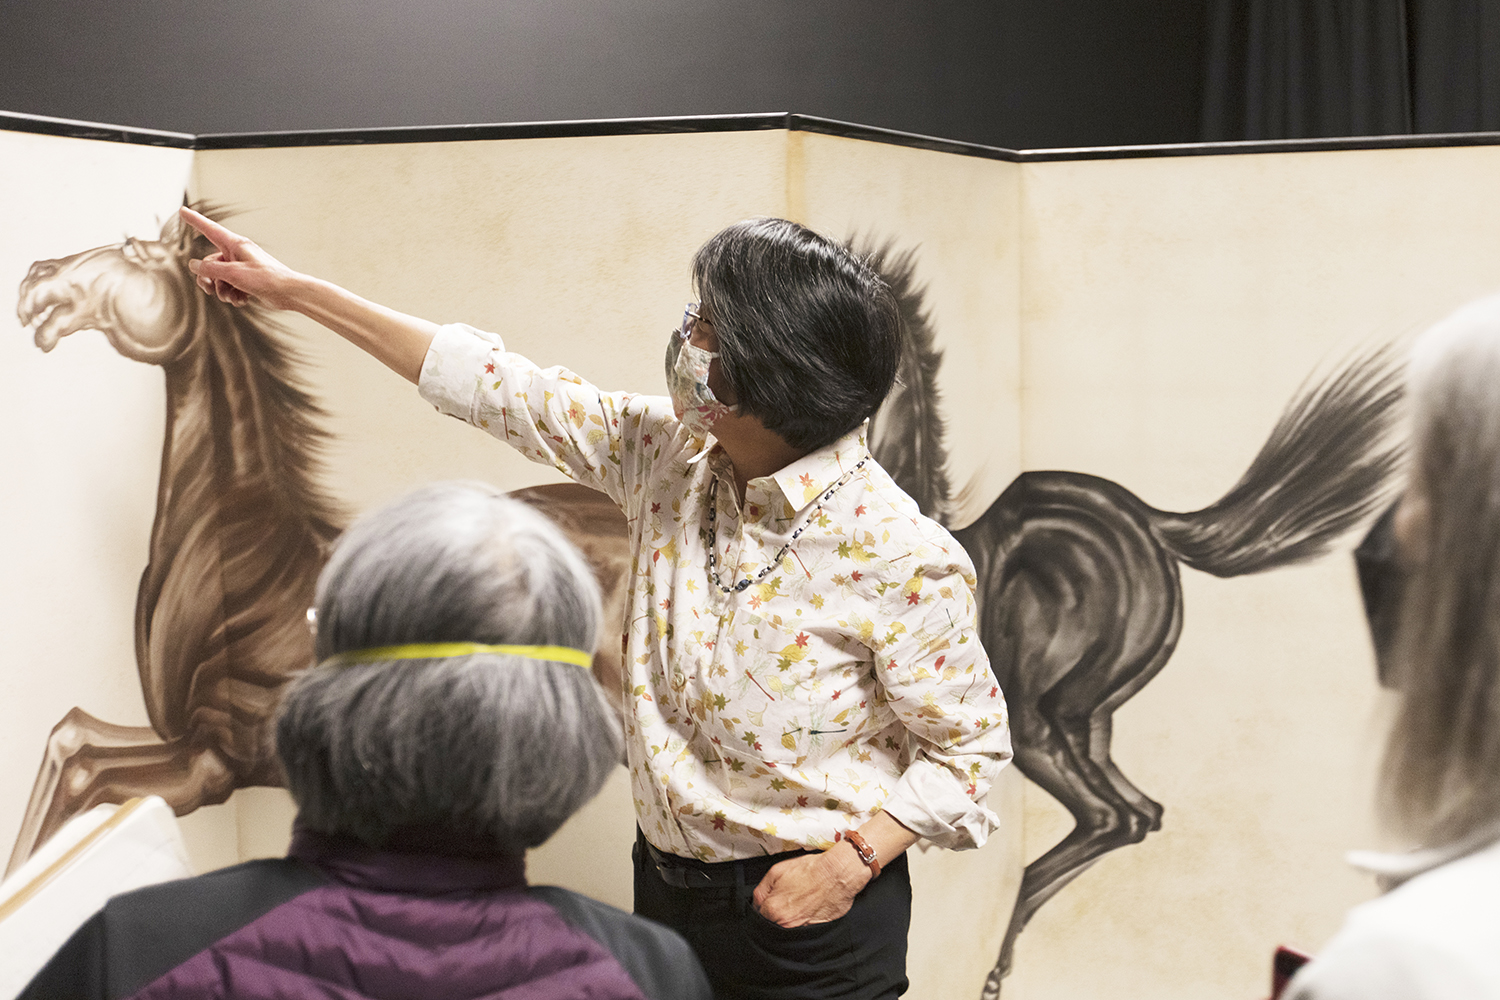 A tall Japanese style screen made of four panels with two large horses, one black one brown painted in large, gestural strokes arcoss the panels. Kimi Hill stands in from on the screen gesturing to a detail for the crowd of people looking on.